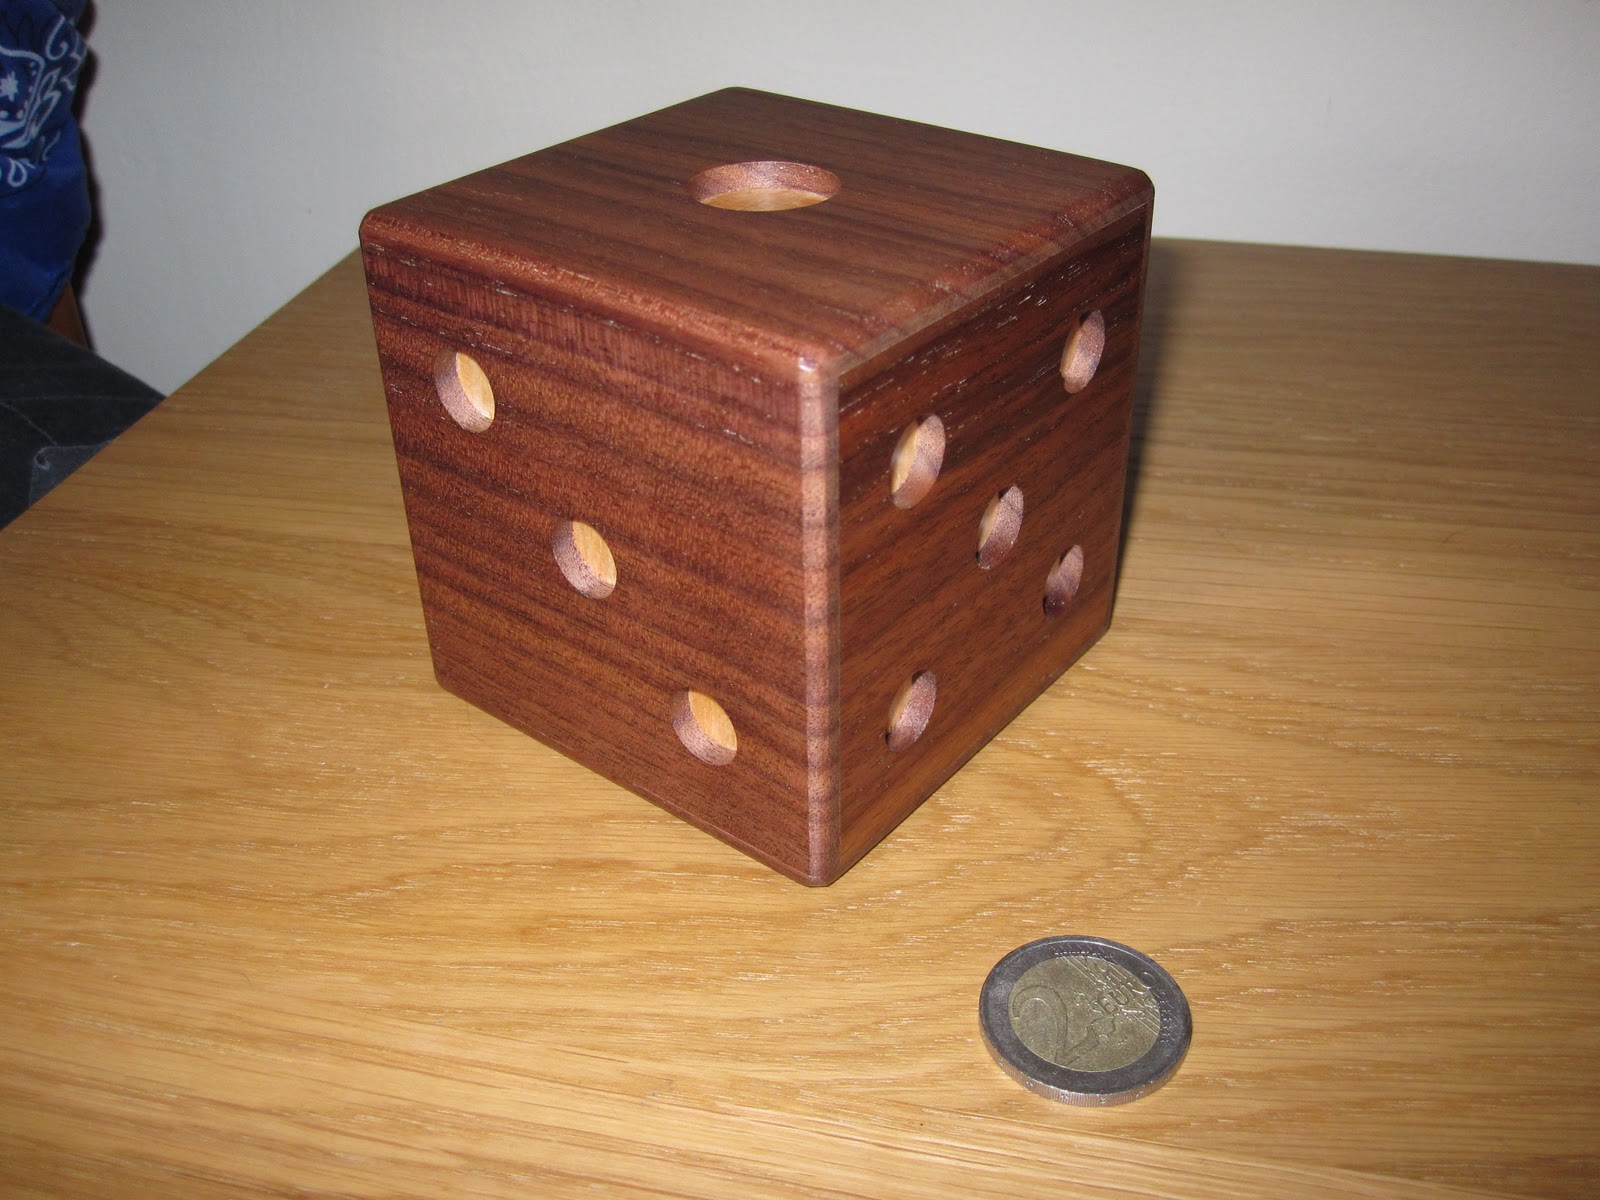 Best Woodworking Plans And Guide: Free Wood Puzzle Box ...